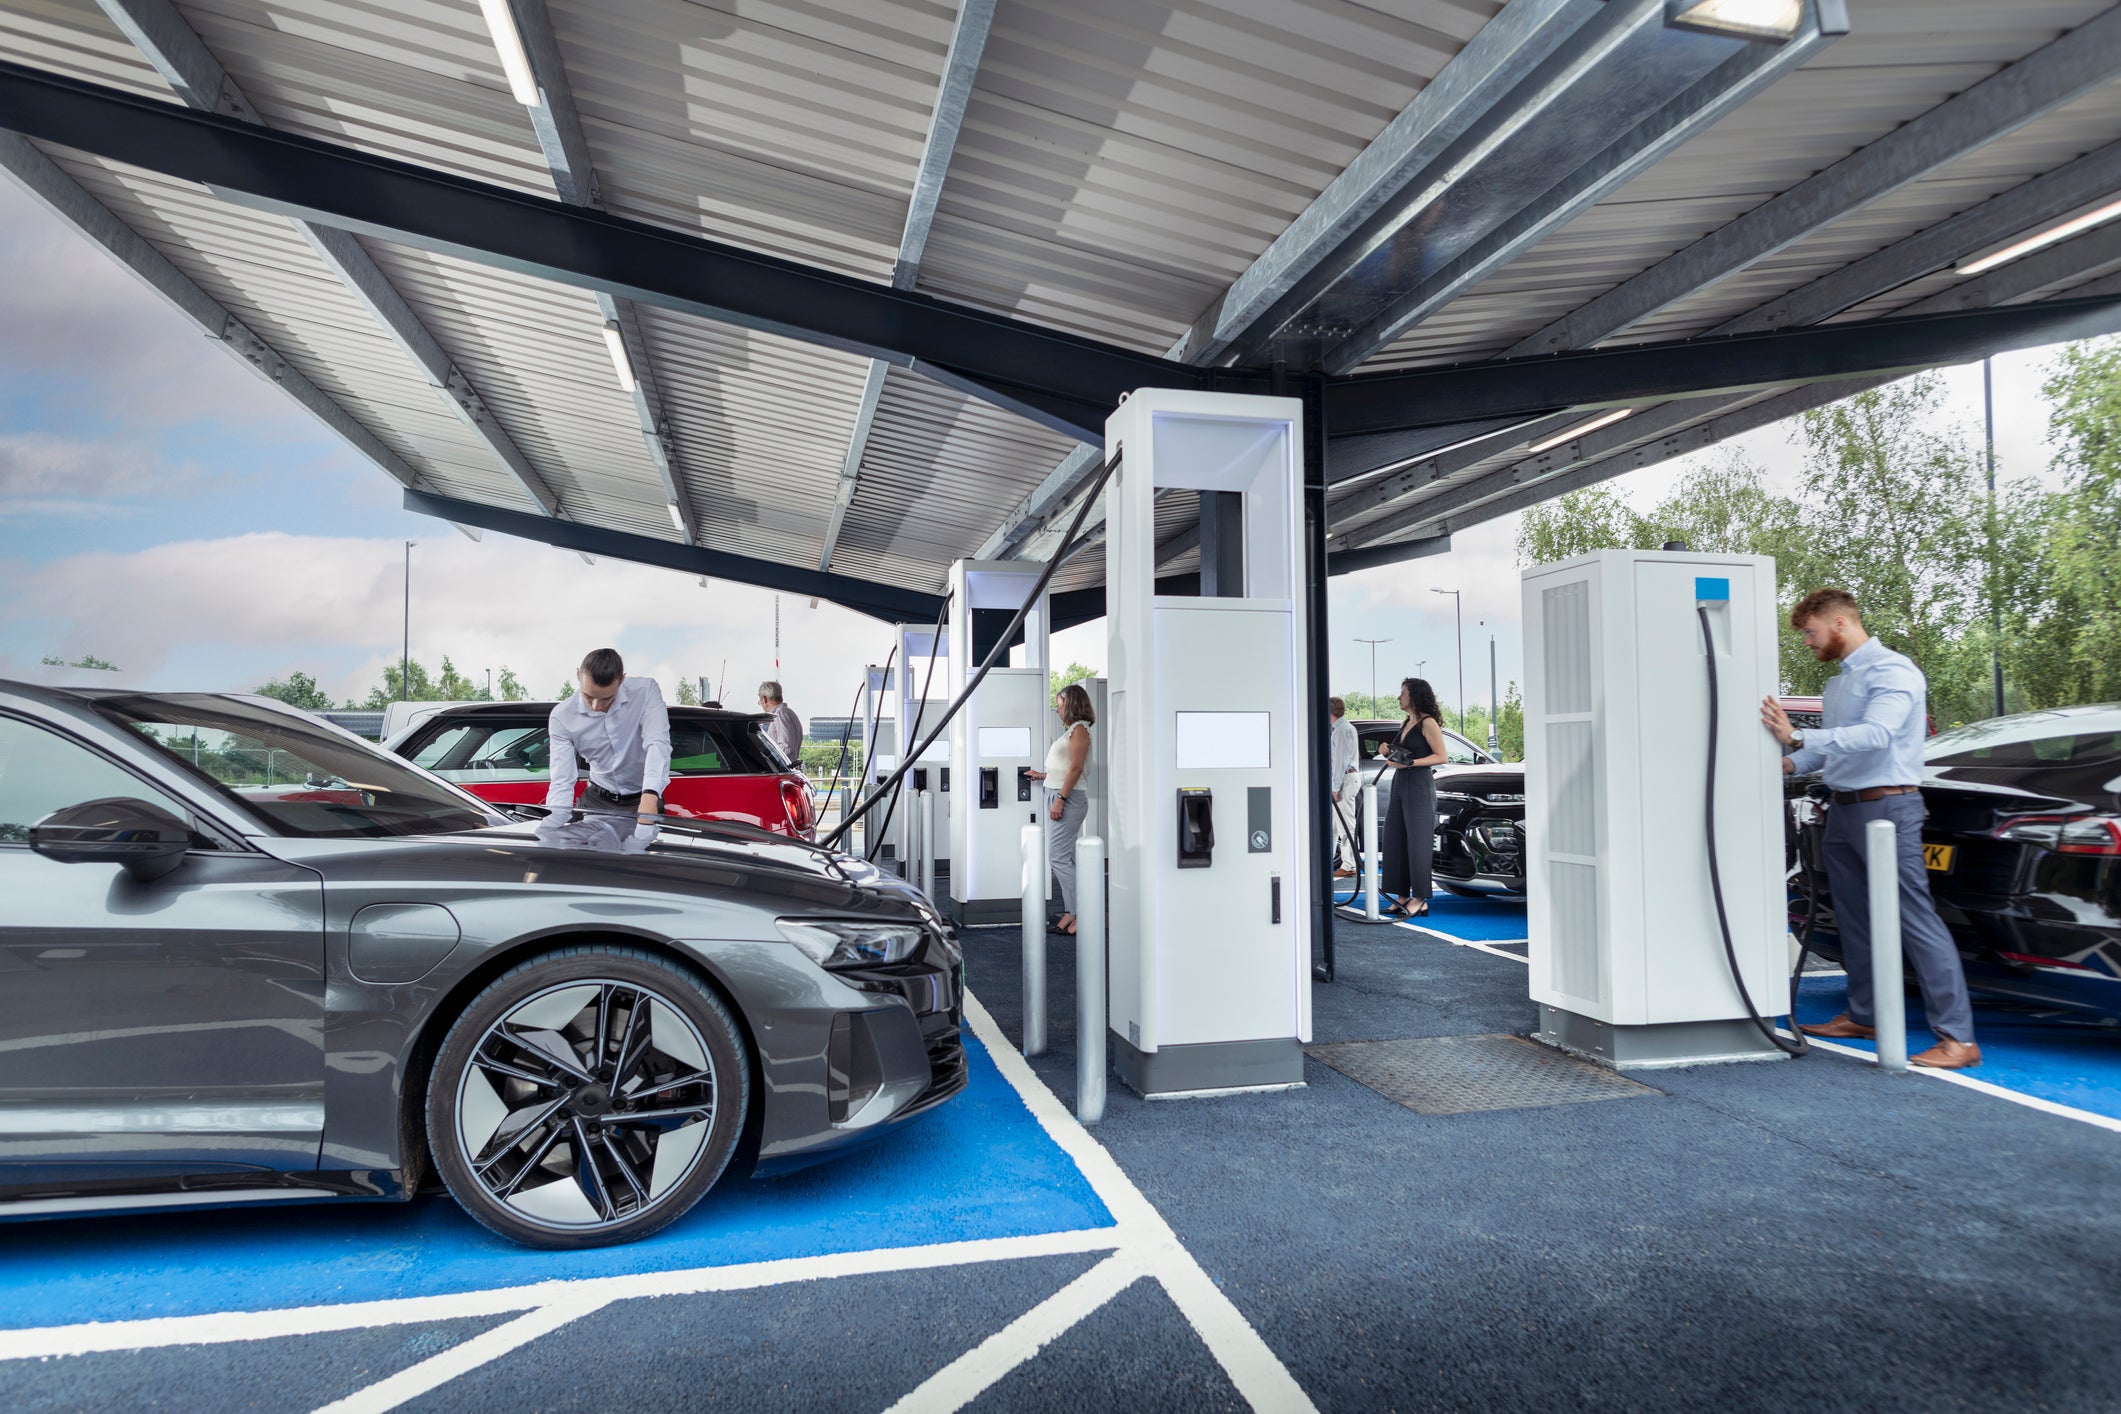 The Inflation Reduction Act’s key incentives for EV adoption